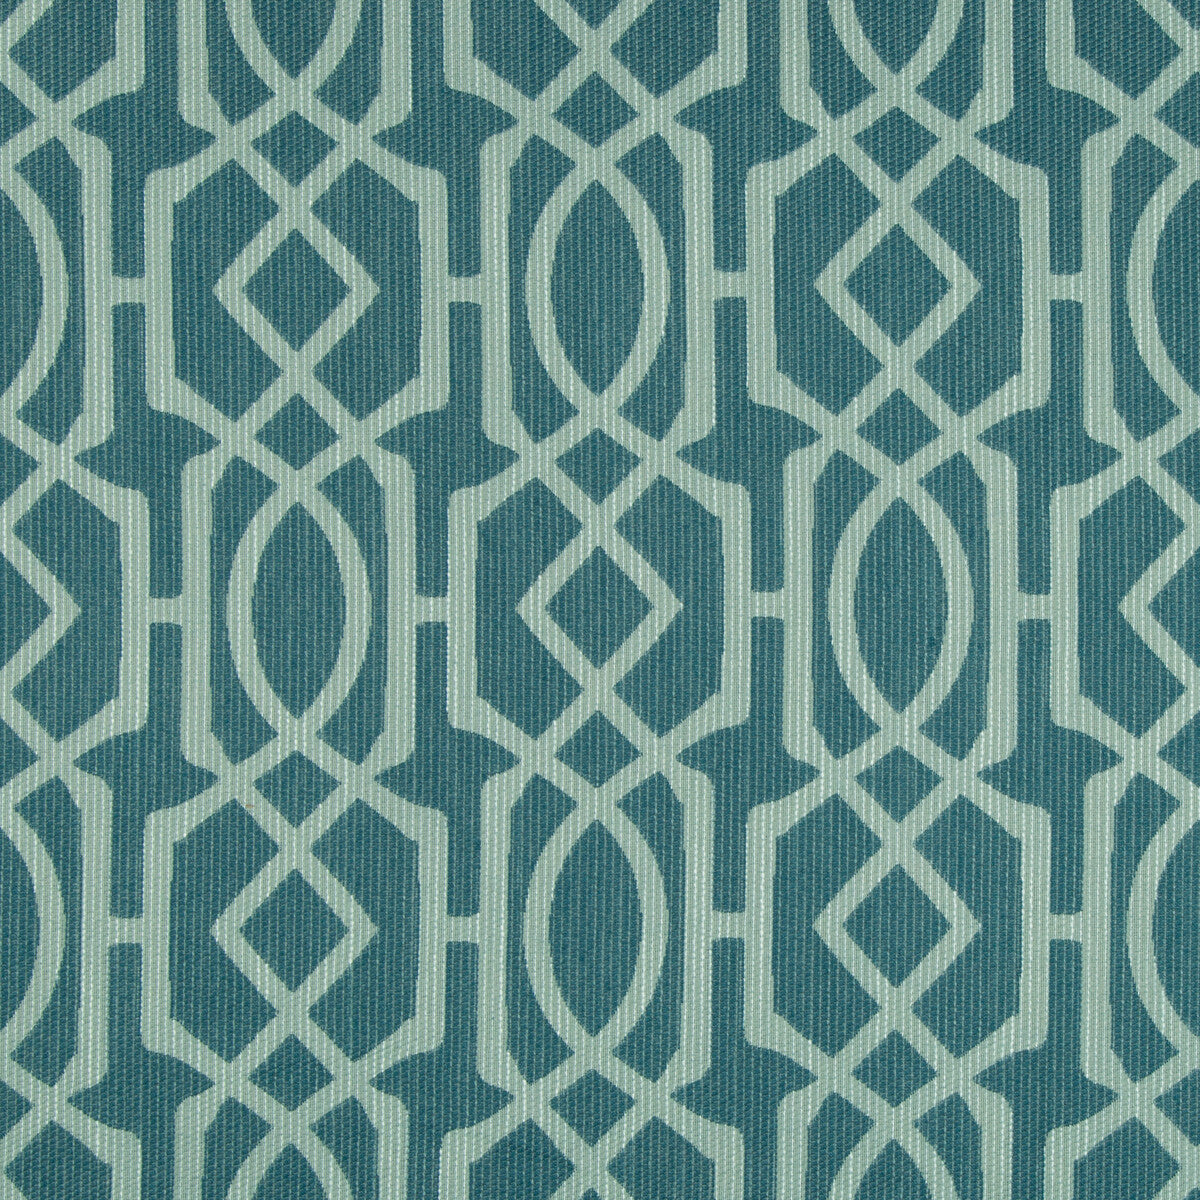 Kravet Design fabric in 34700-35 color - pattern 34700.35.0 - by Kravet Design in the Performance Crypton Home collection